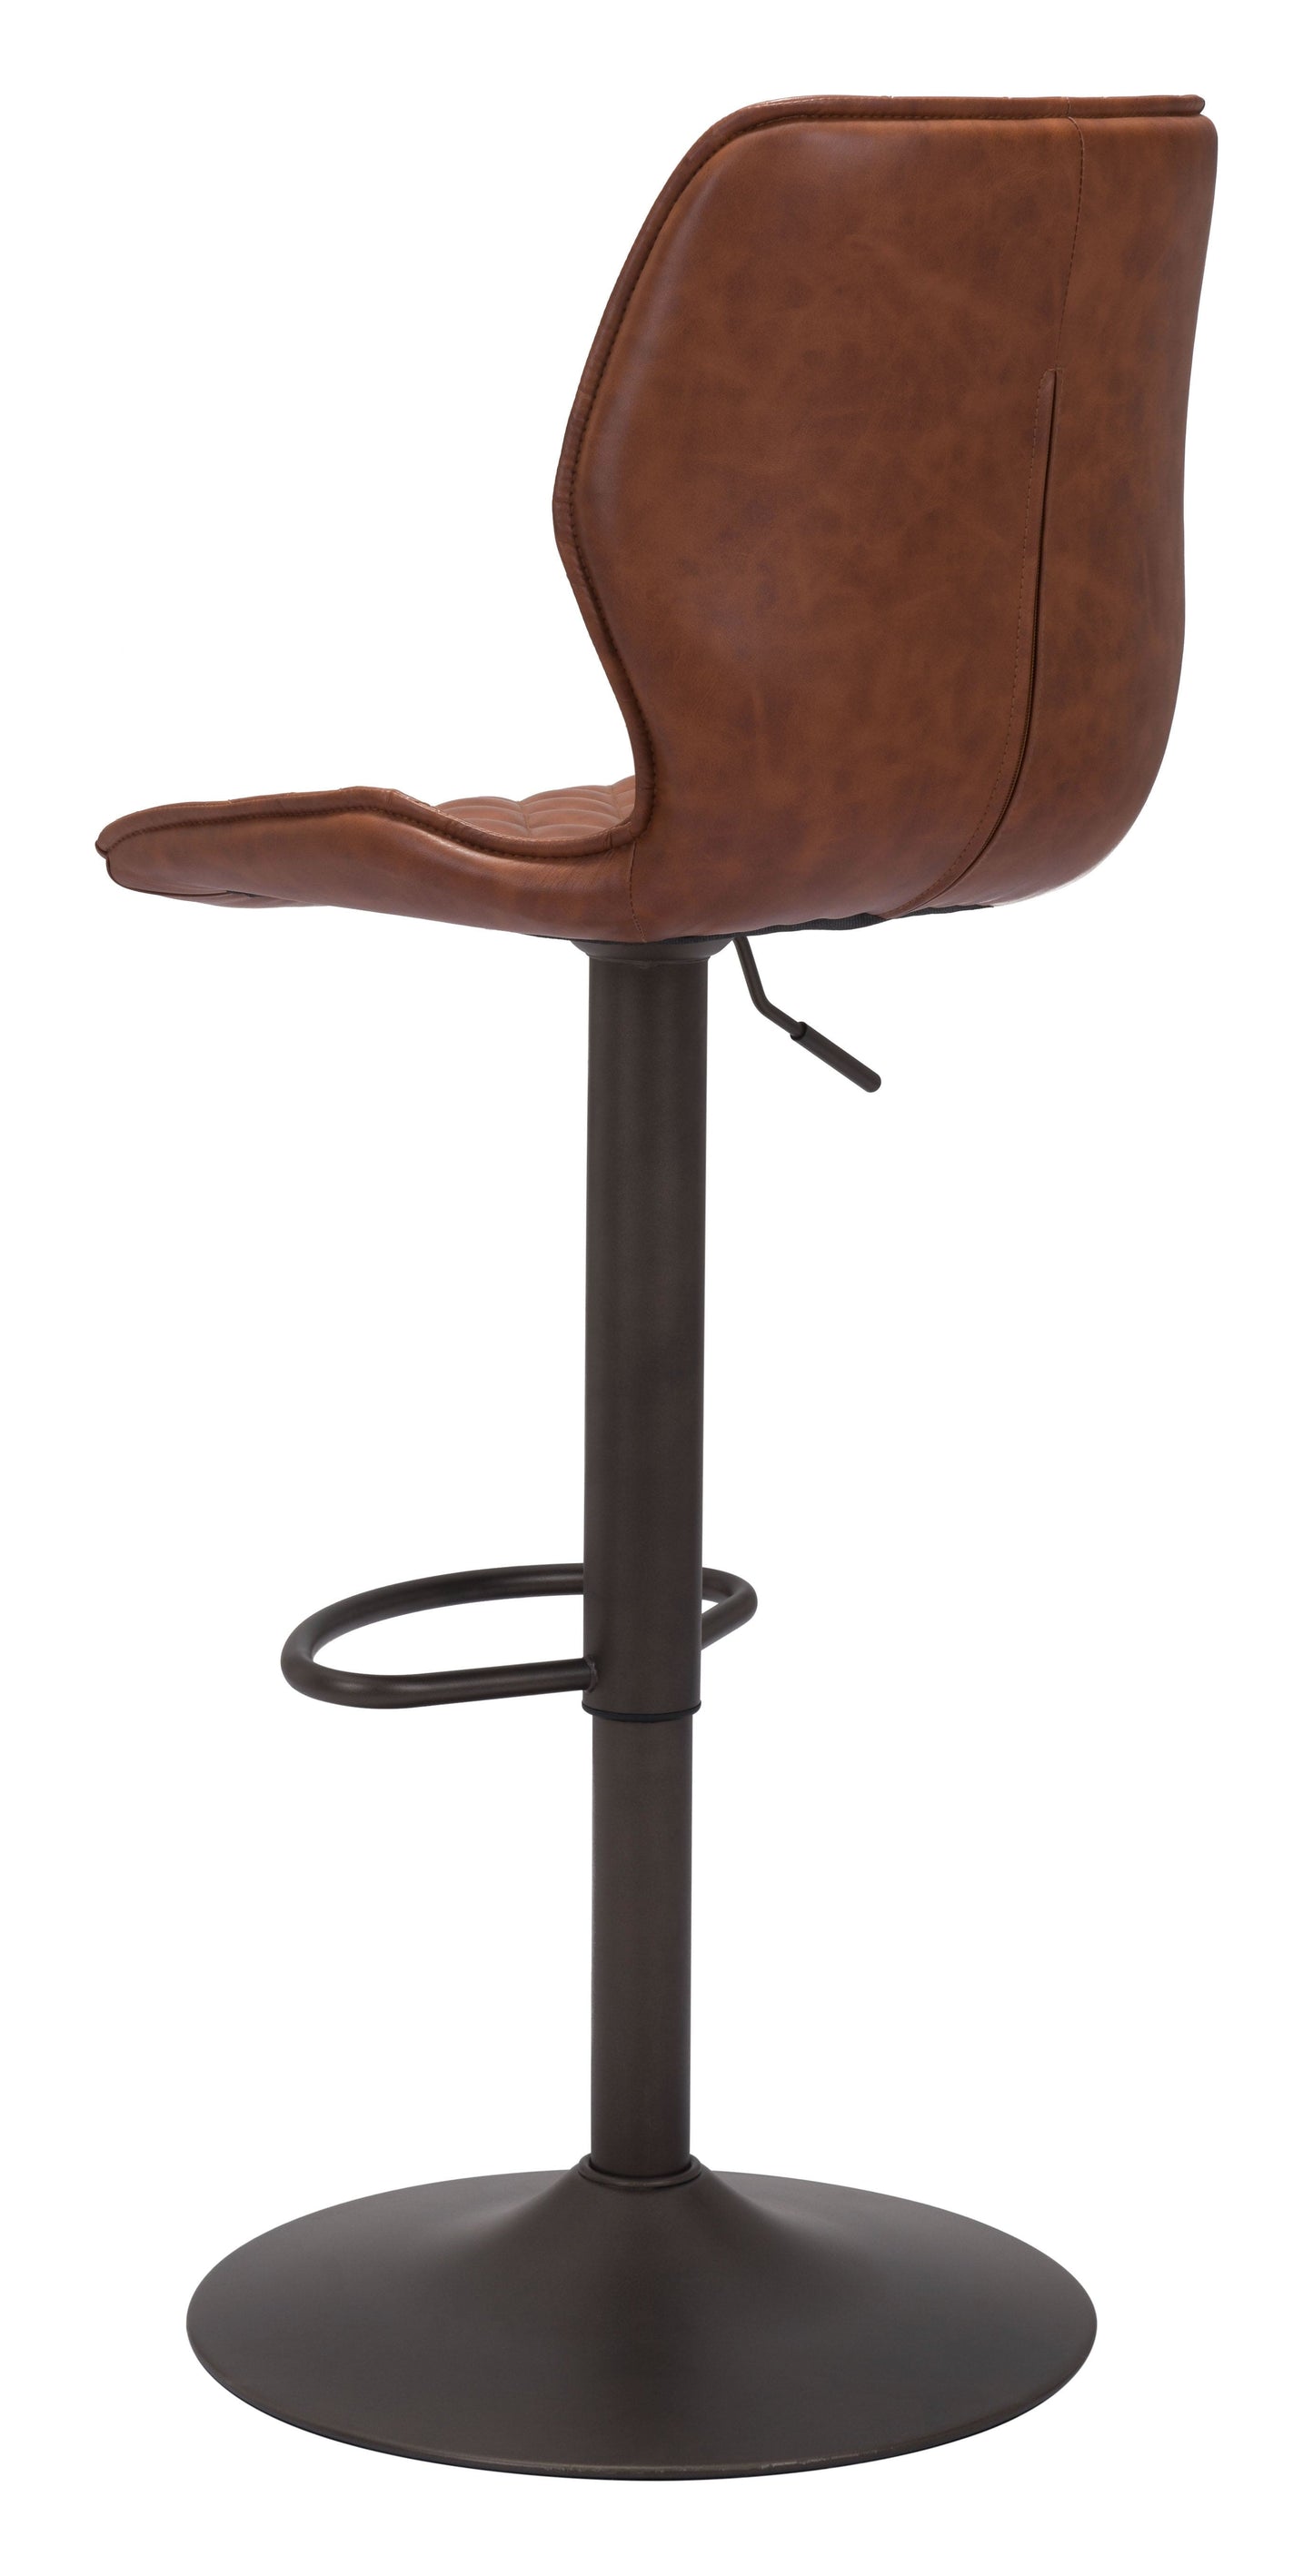 Angled Back View of Hospitality Grade Chair